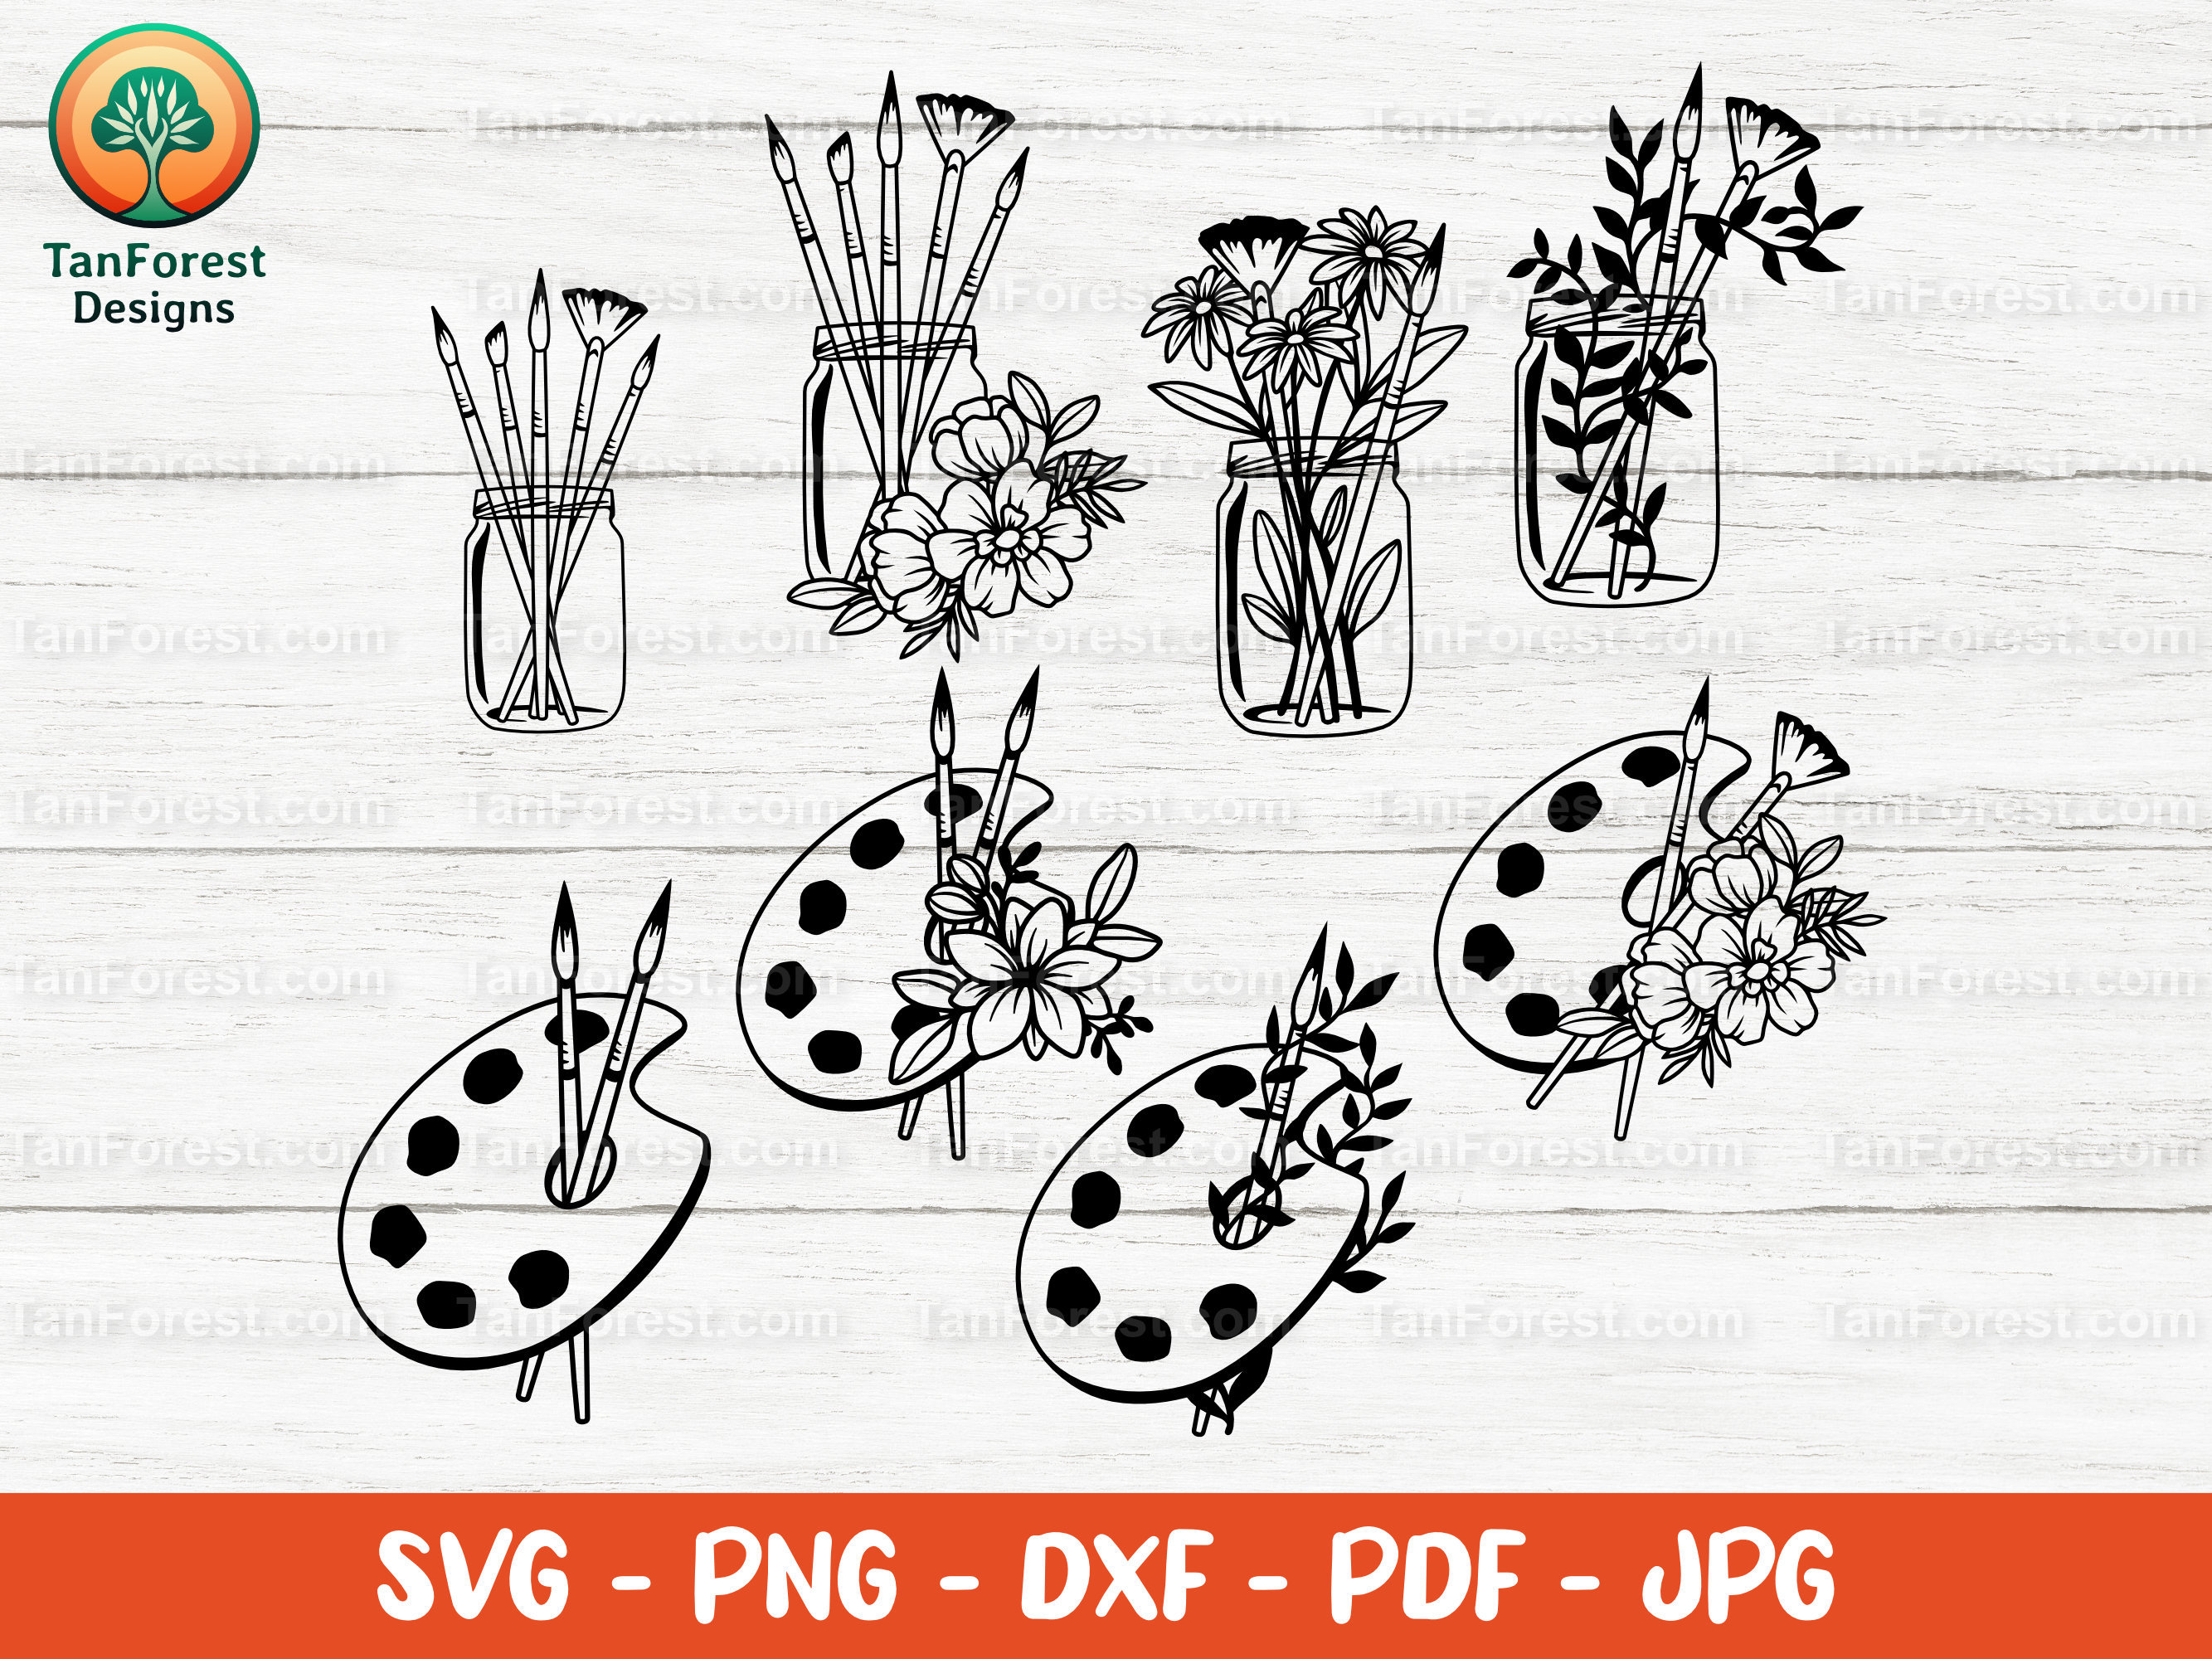 Vector Image Tools And Drawing Materials Royalty Free SVG, Cliparts,  Vectors, and Stock Illustration. Image 9224232.